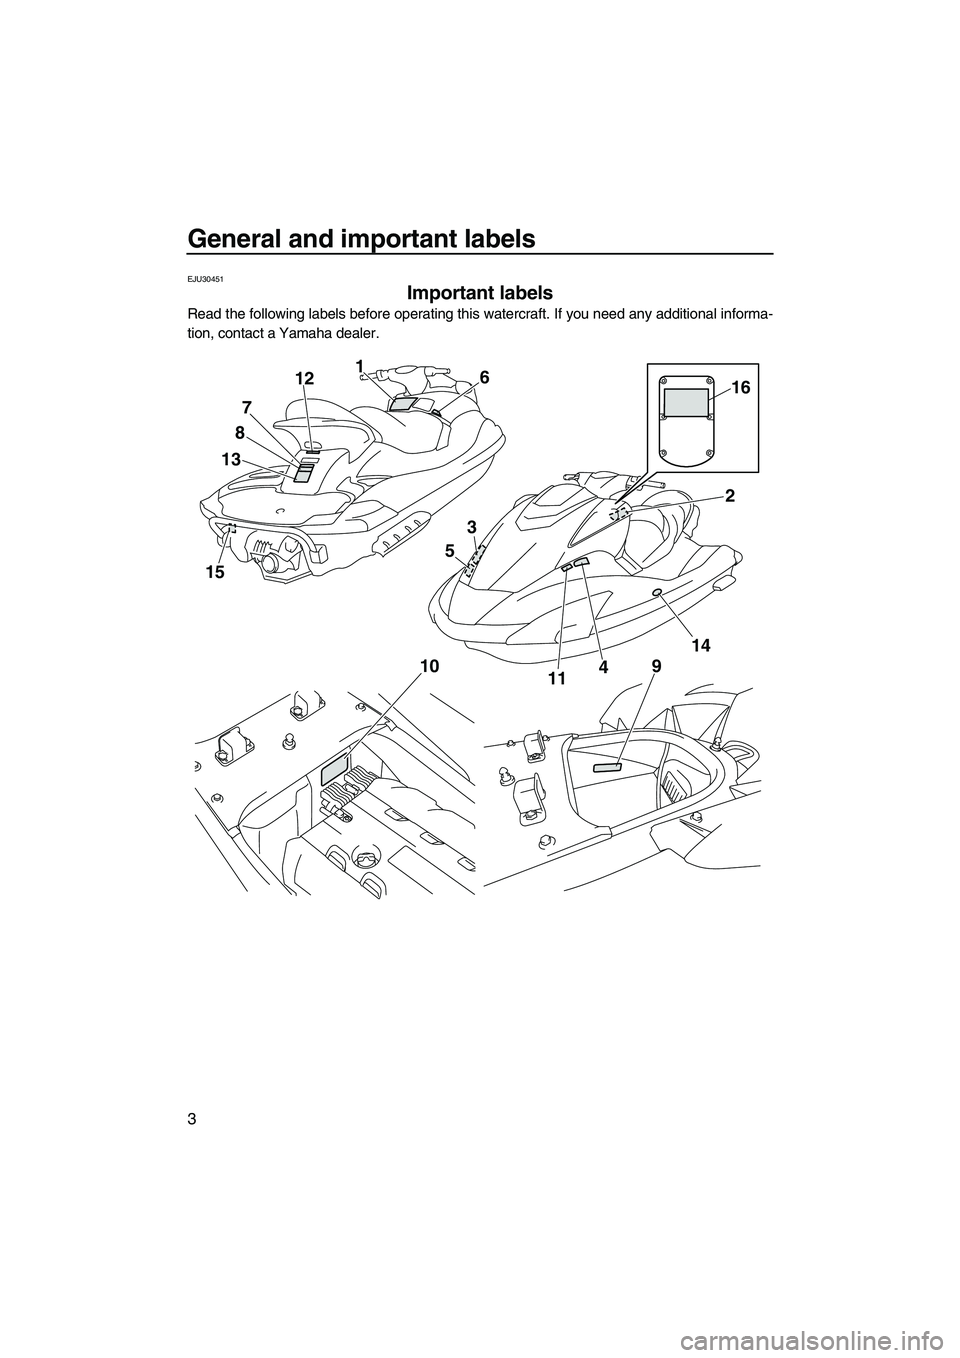 YAMAHA SVHO 2009  Owners Manual General and important labels
3
EJU30451
Important labels 
Read the following labels before operating this watercraft. If you need any additional informa-
tion, contact a Yamaha dealer.
15
1387121
6
4
